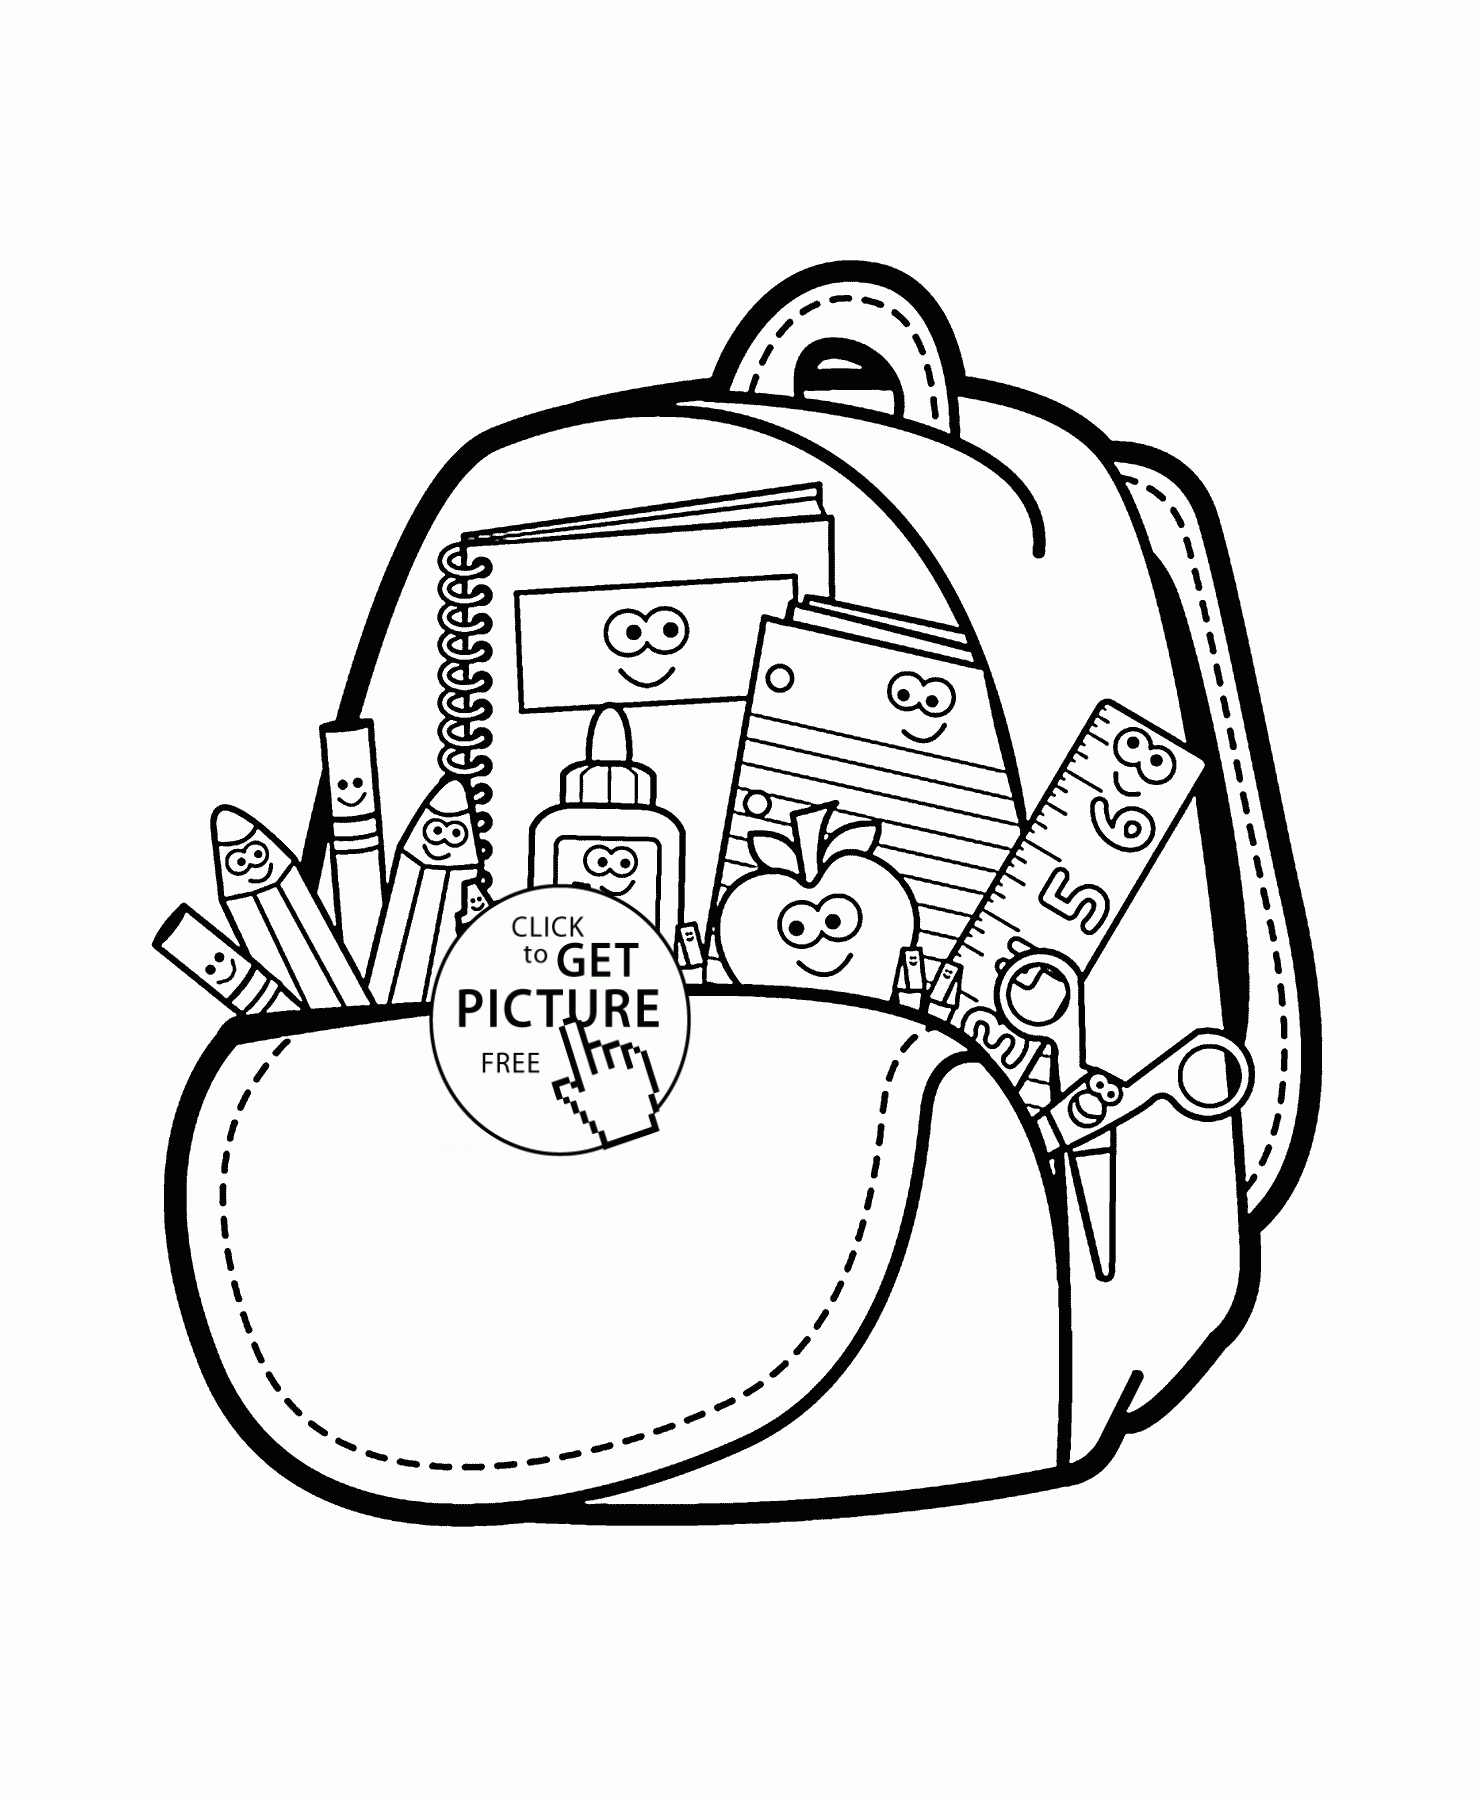 Cartoon School Supplies Coloring Page For Kids, Back To School - Back To School Free Printable Coloring Pages